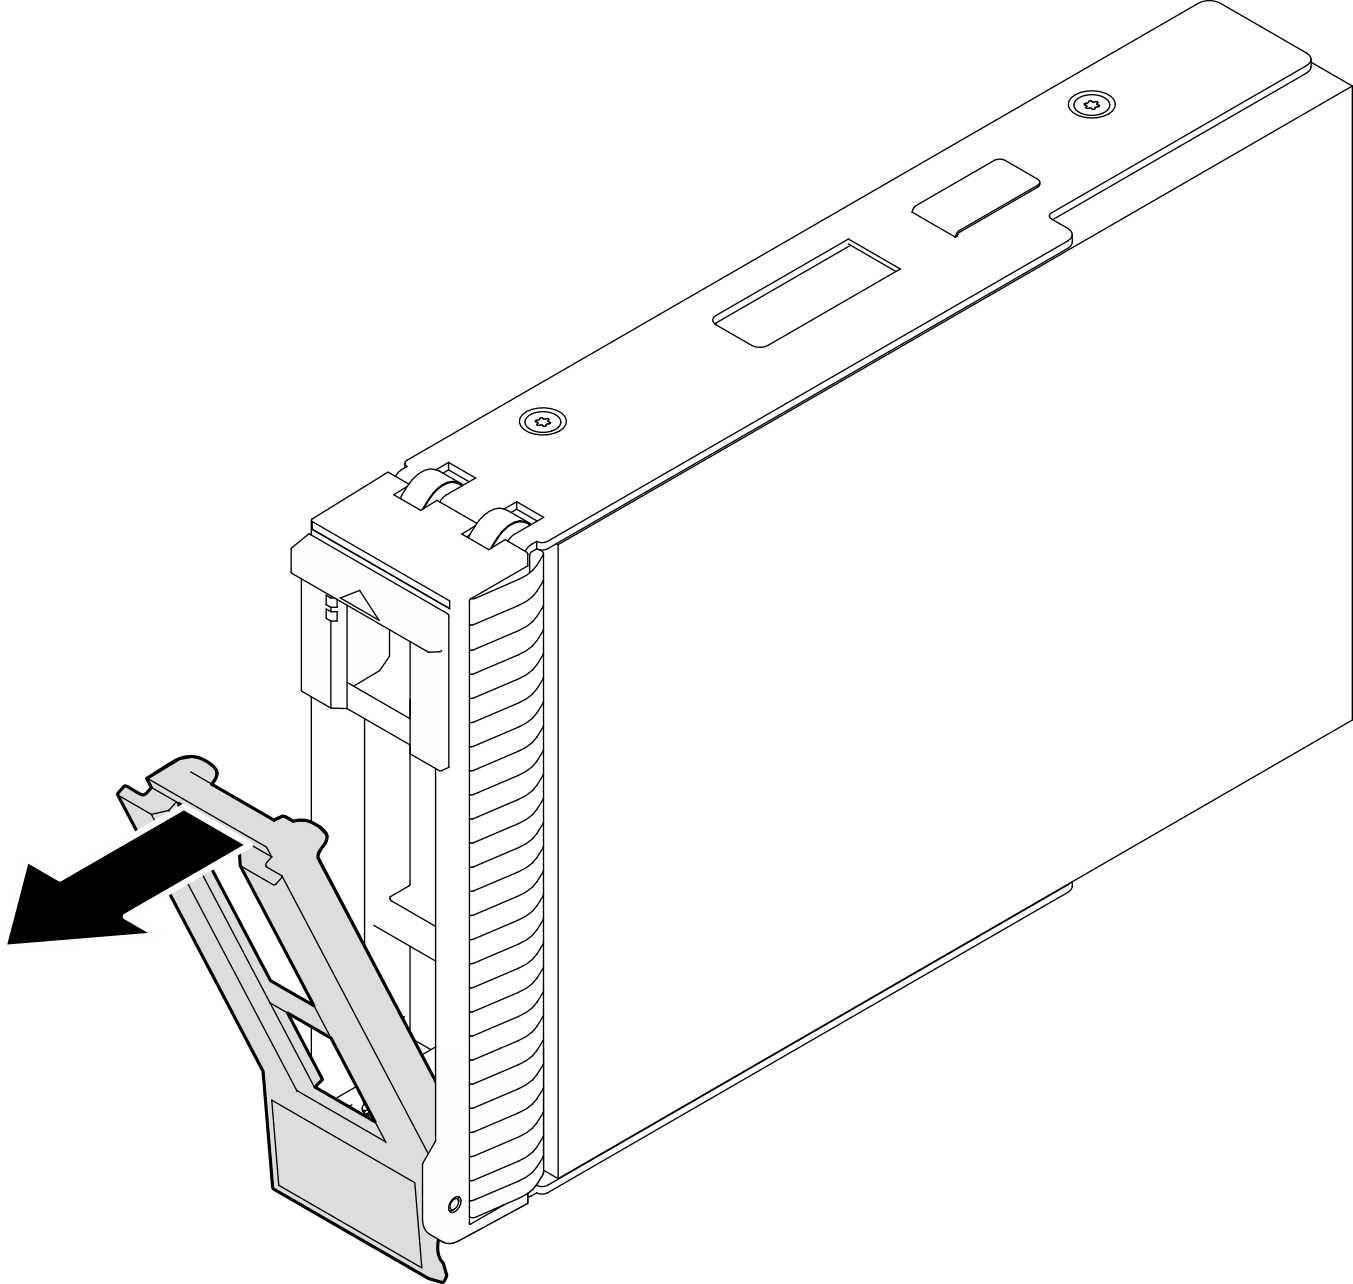 Removing the hot-swap drive from the drive tray